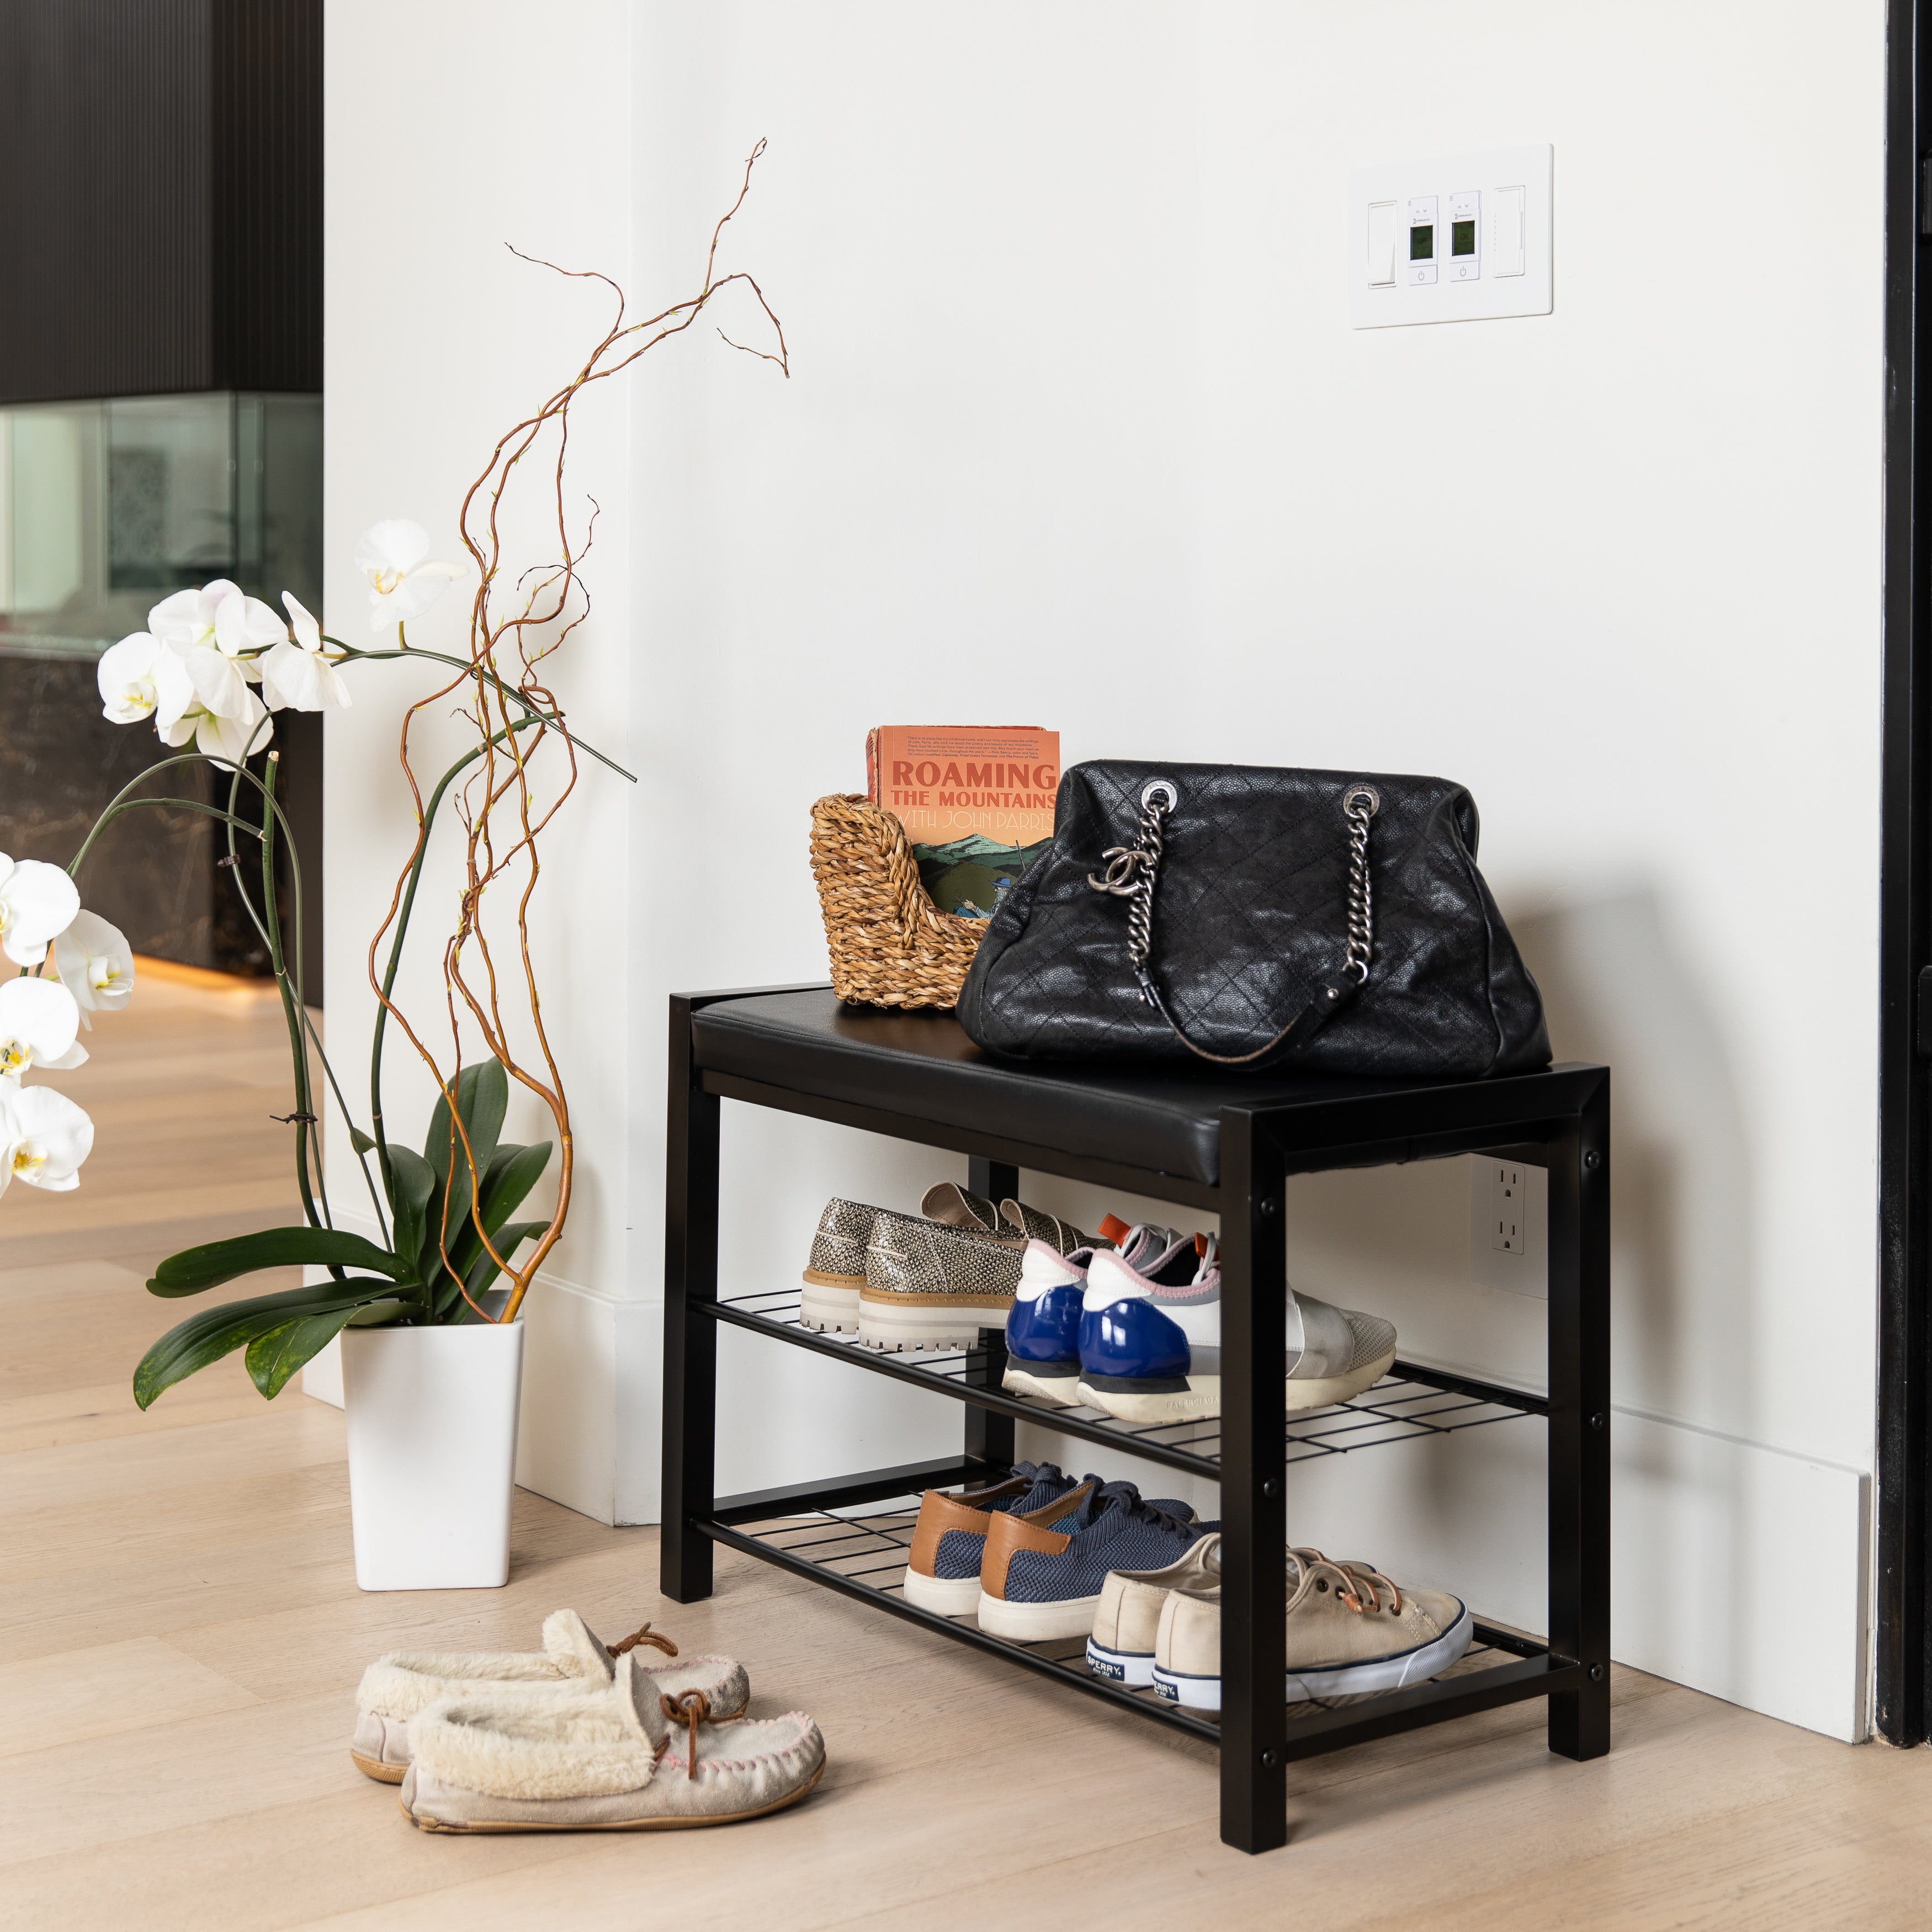 Leatherette Danya – Shoe Rack Frame and Storage with Metal Entryway Bench